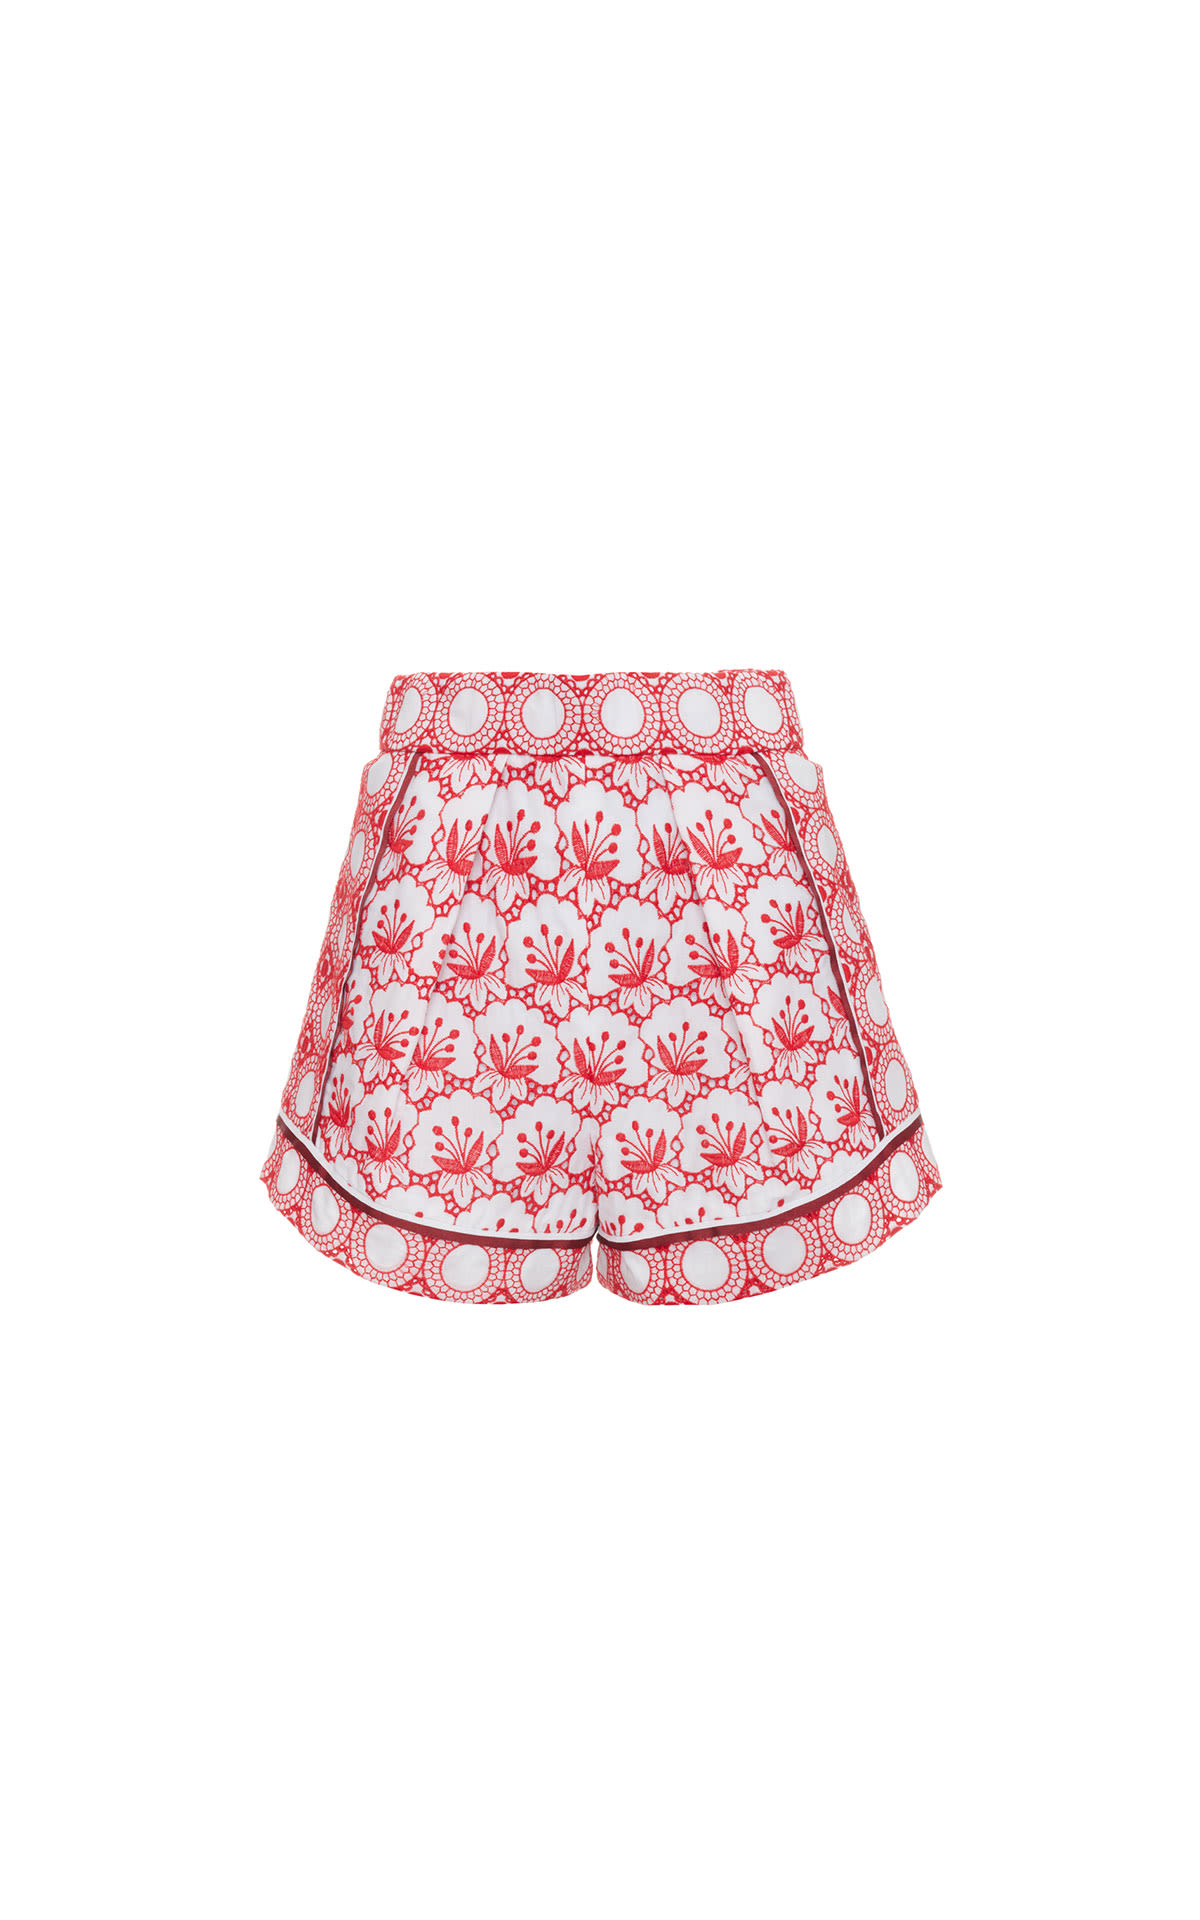 Maje All-over embroidery shorts from Bicester Village